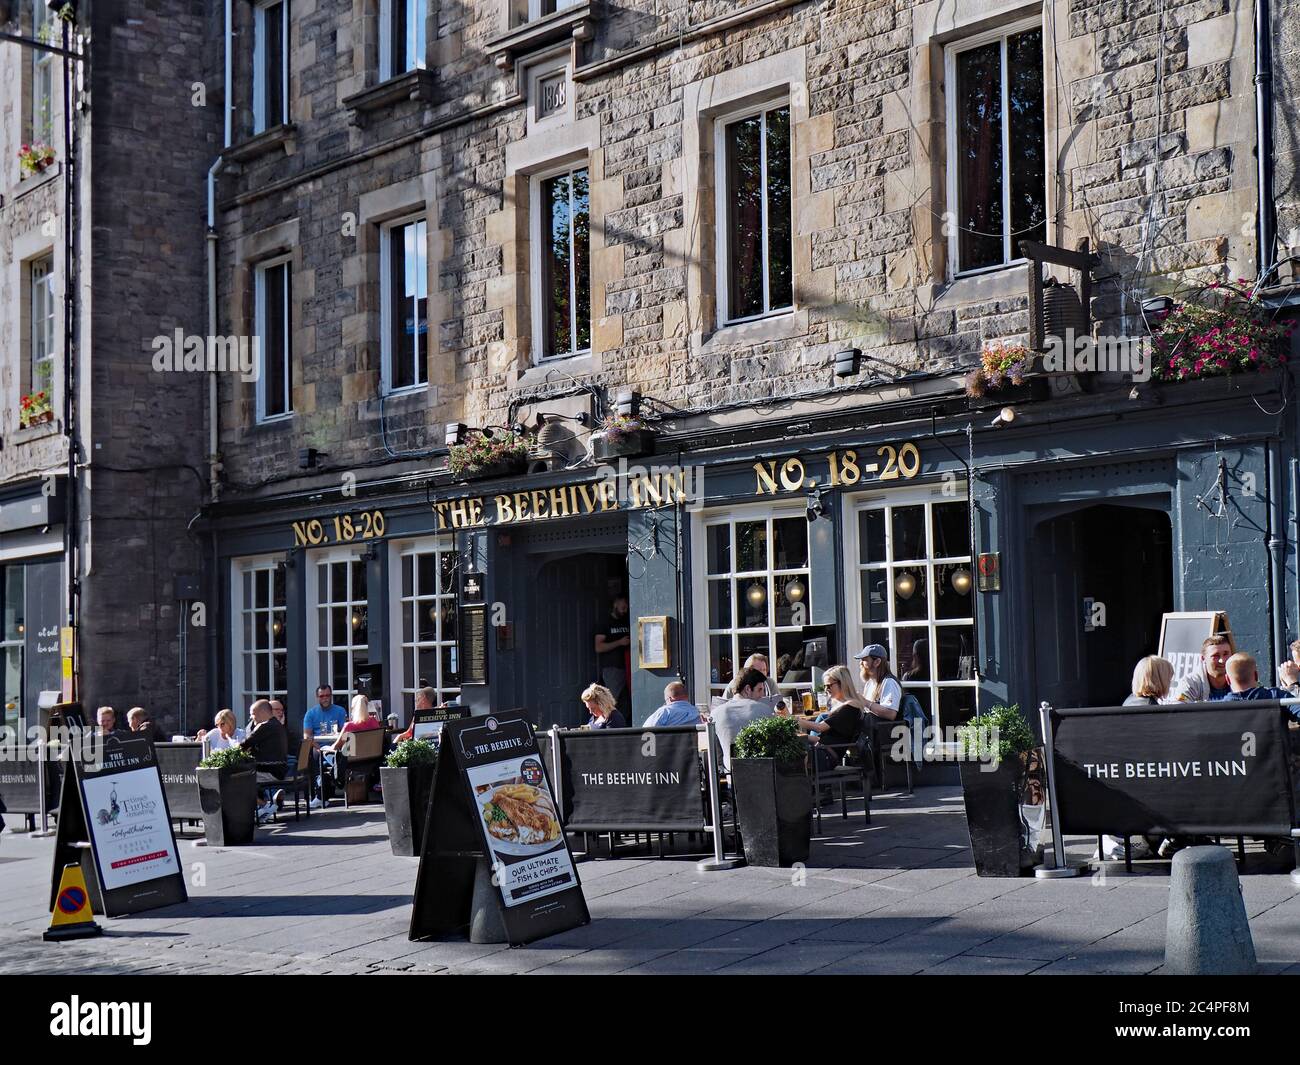 Edinburgh, Scotland  -  September 20, 2016: Grassmarket Square, with outdoor seating areas of restaurants in old stone buildings. Stock Photo